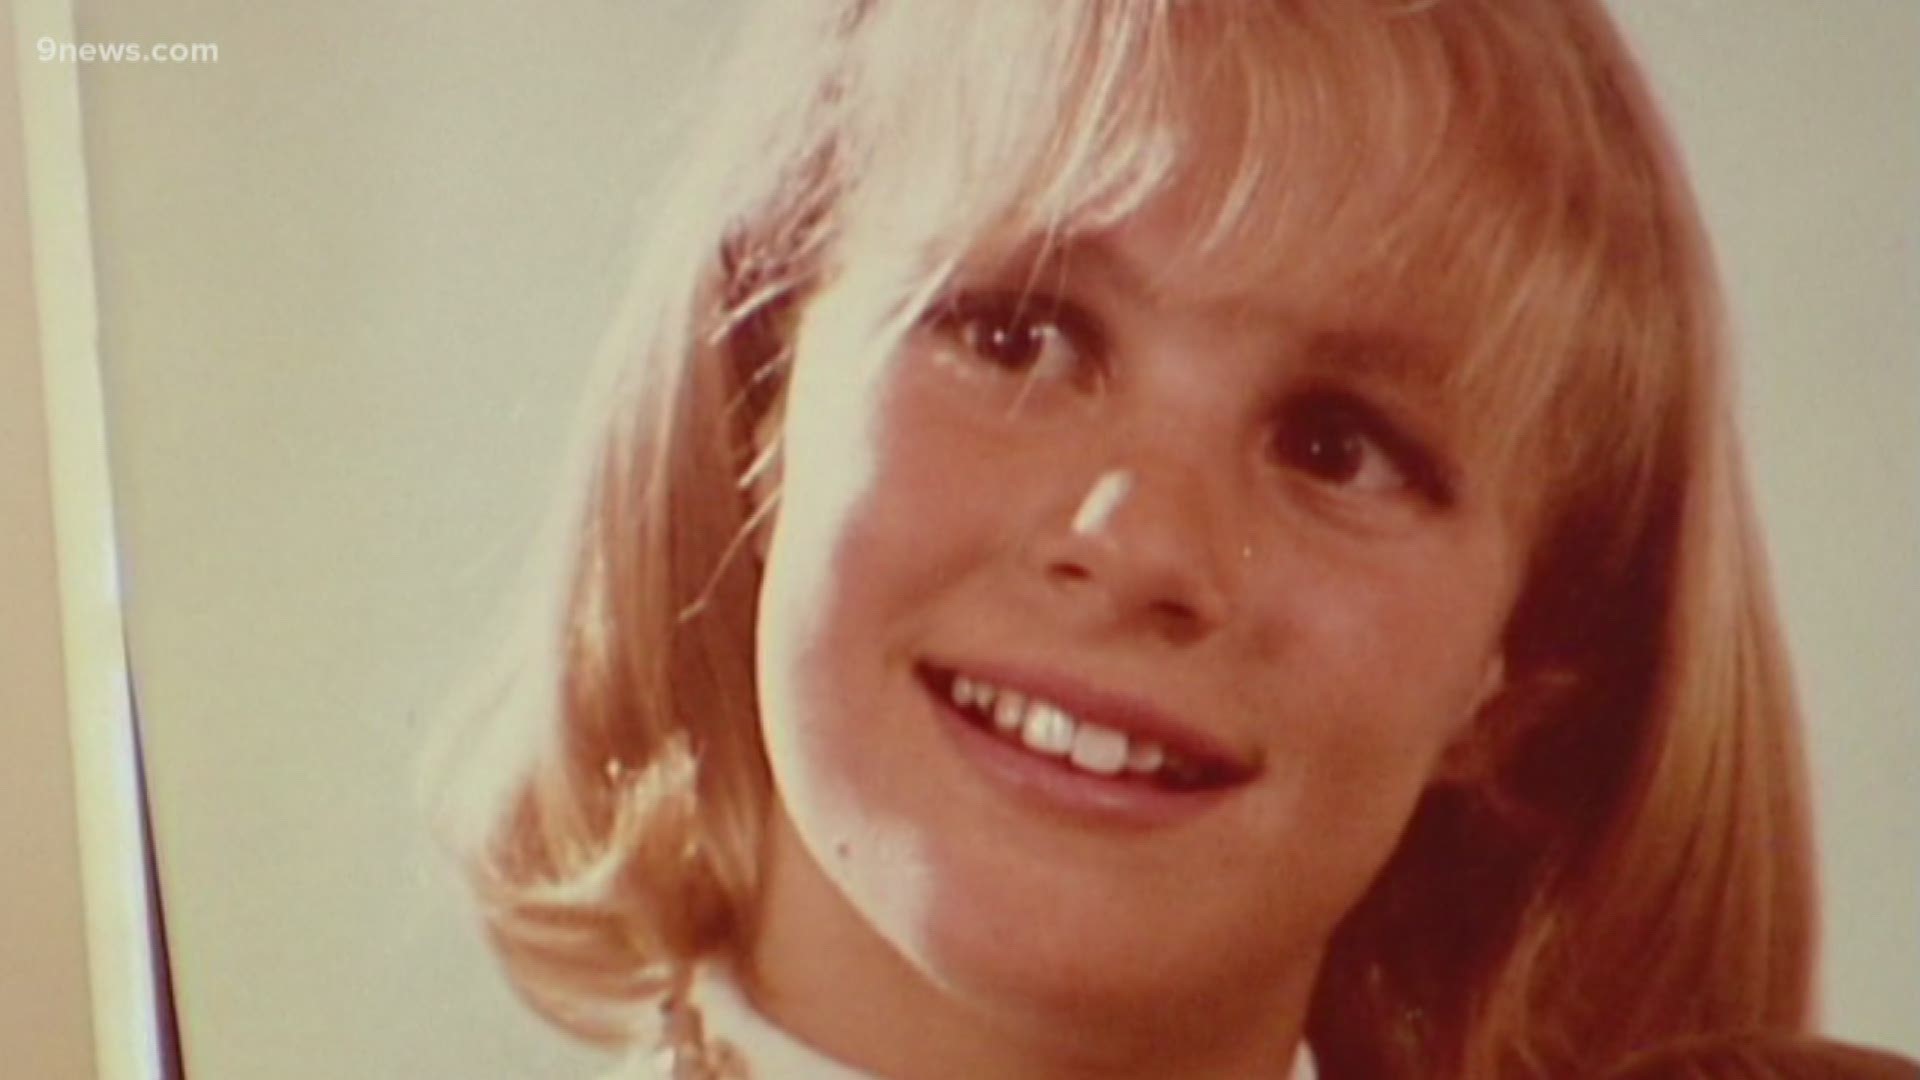 Marilee Burt was 15 when she disappeared on Feb. 26, 1970. Her body was found the next day in Deer Creek Canyon.